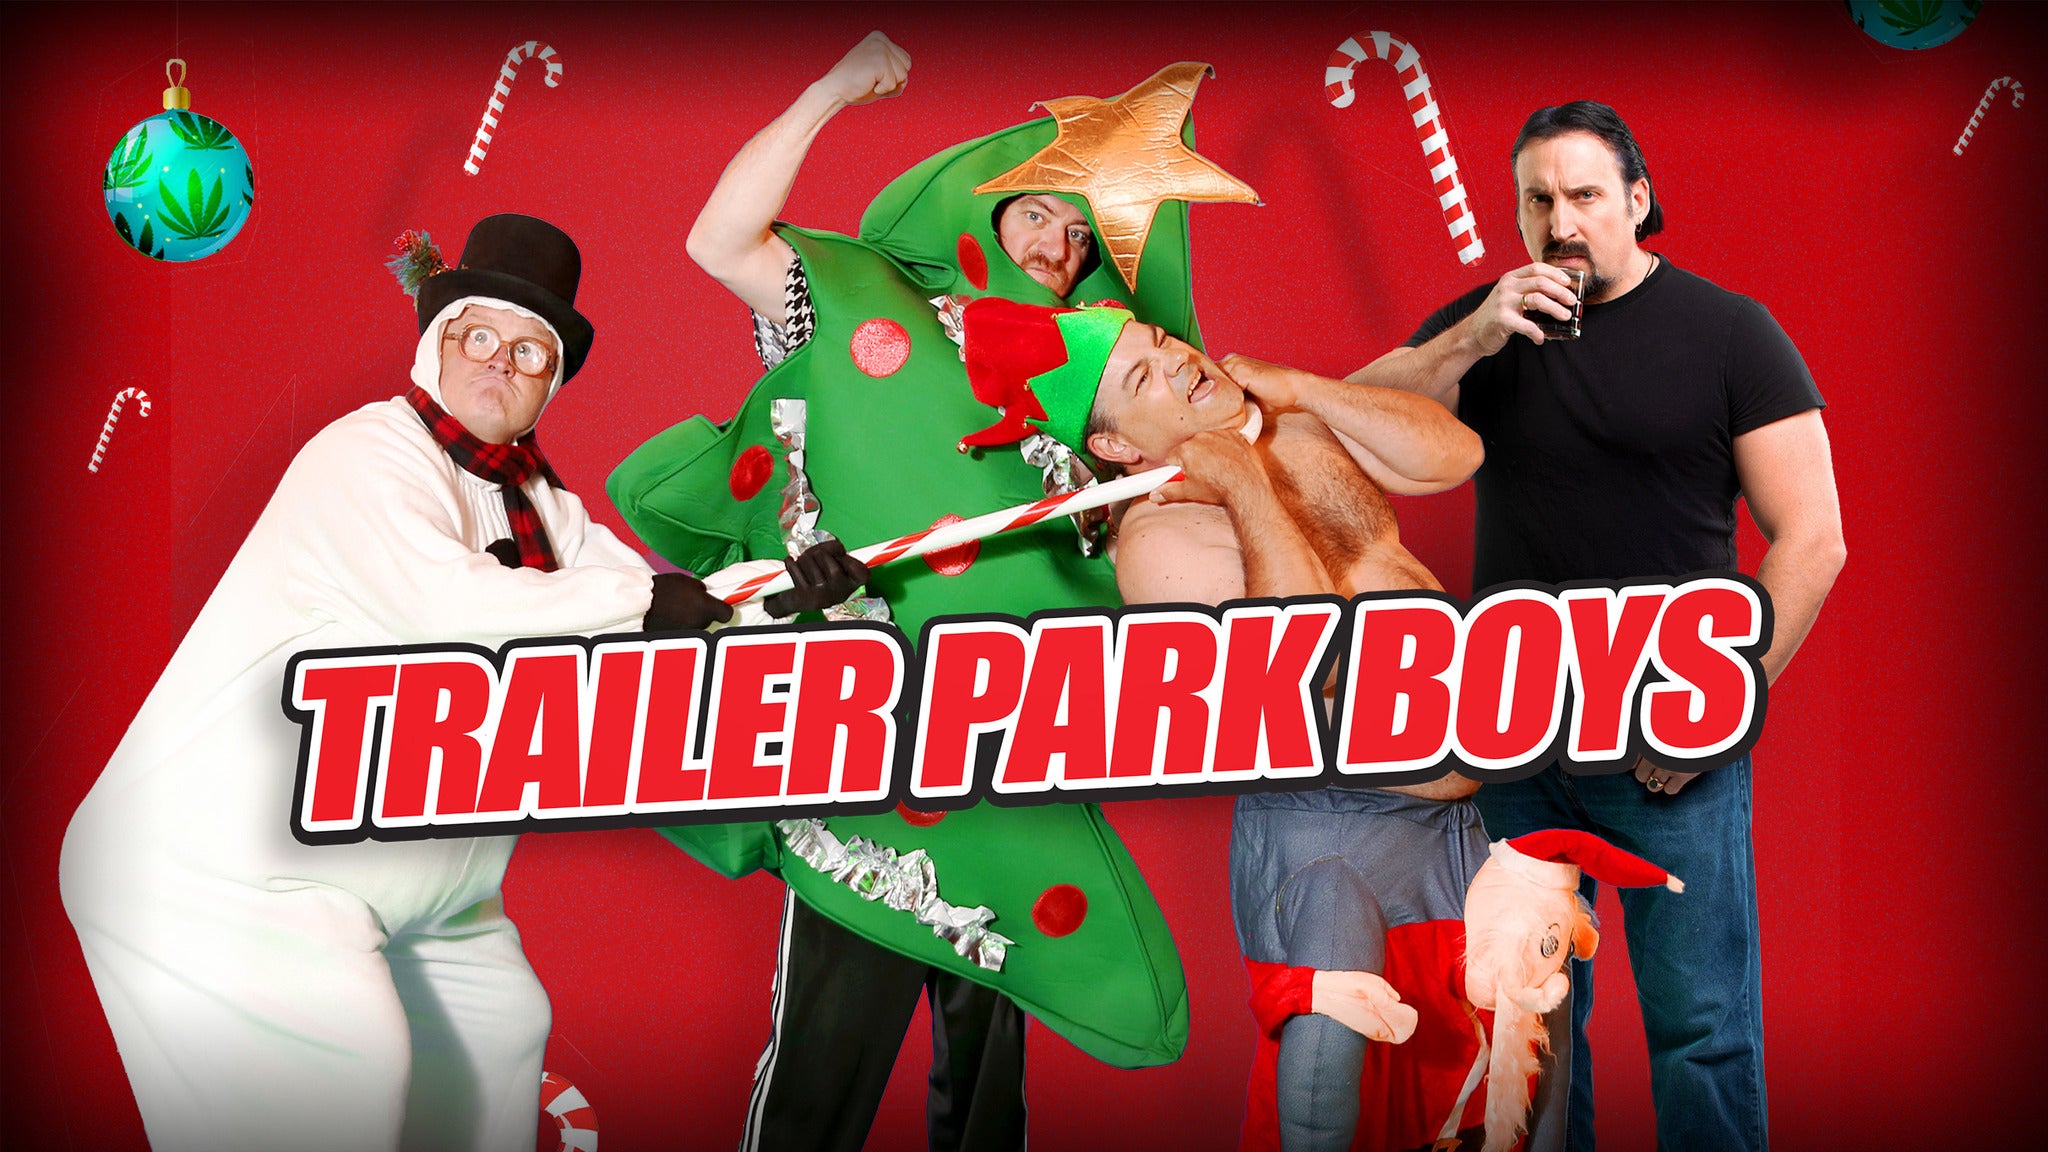 Trailer Park Boys 20th Anniversary Sunnyvale Xmas in Rochester promo photo for Official Platinum Public Onsale presale offer code